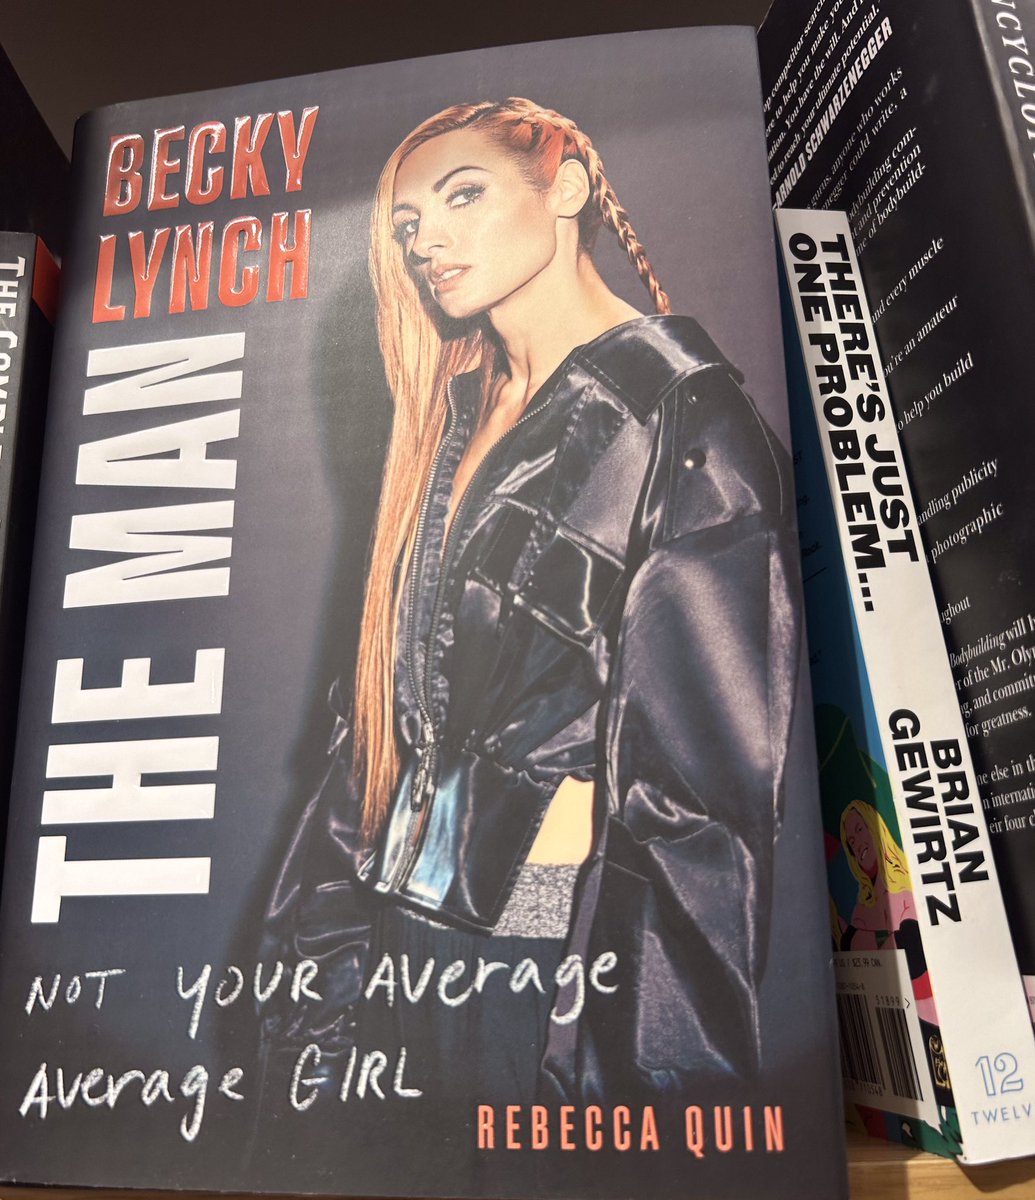 Now is the perfect time to pick up the excellent new book by @BeckyLynchWWE (and also grab whatever book happens to be conveniently lying next to it).